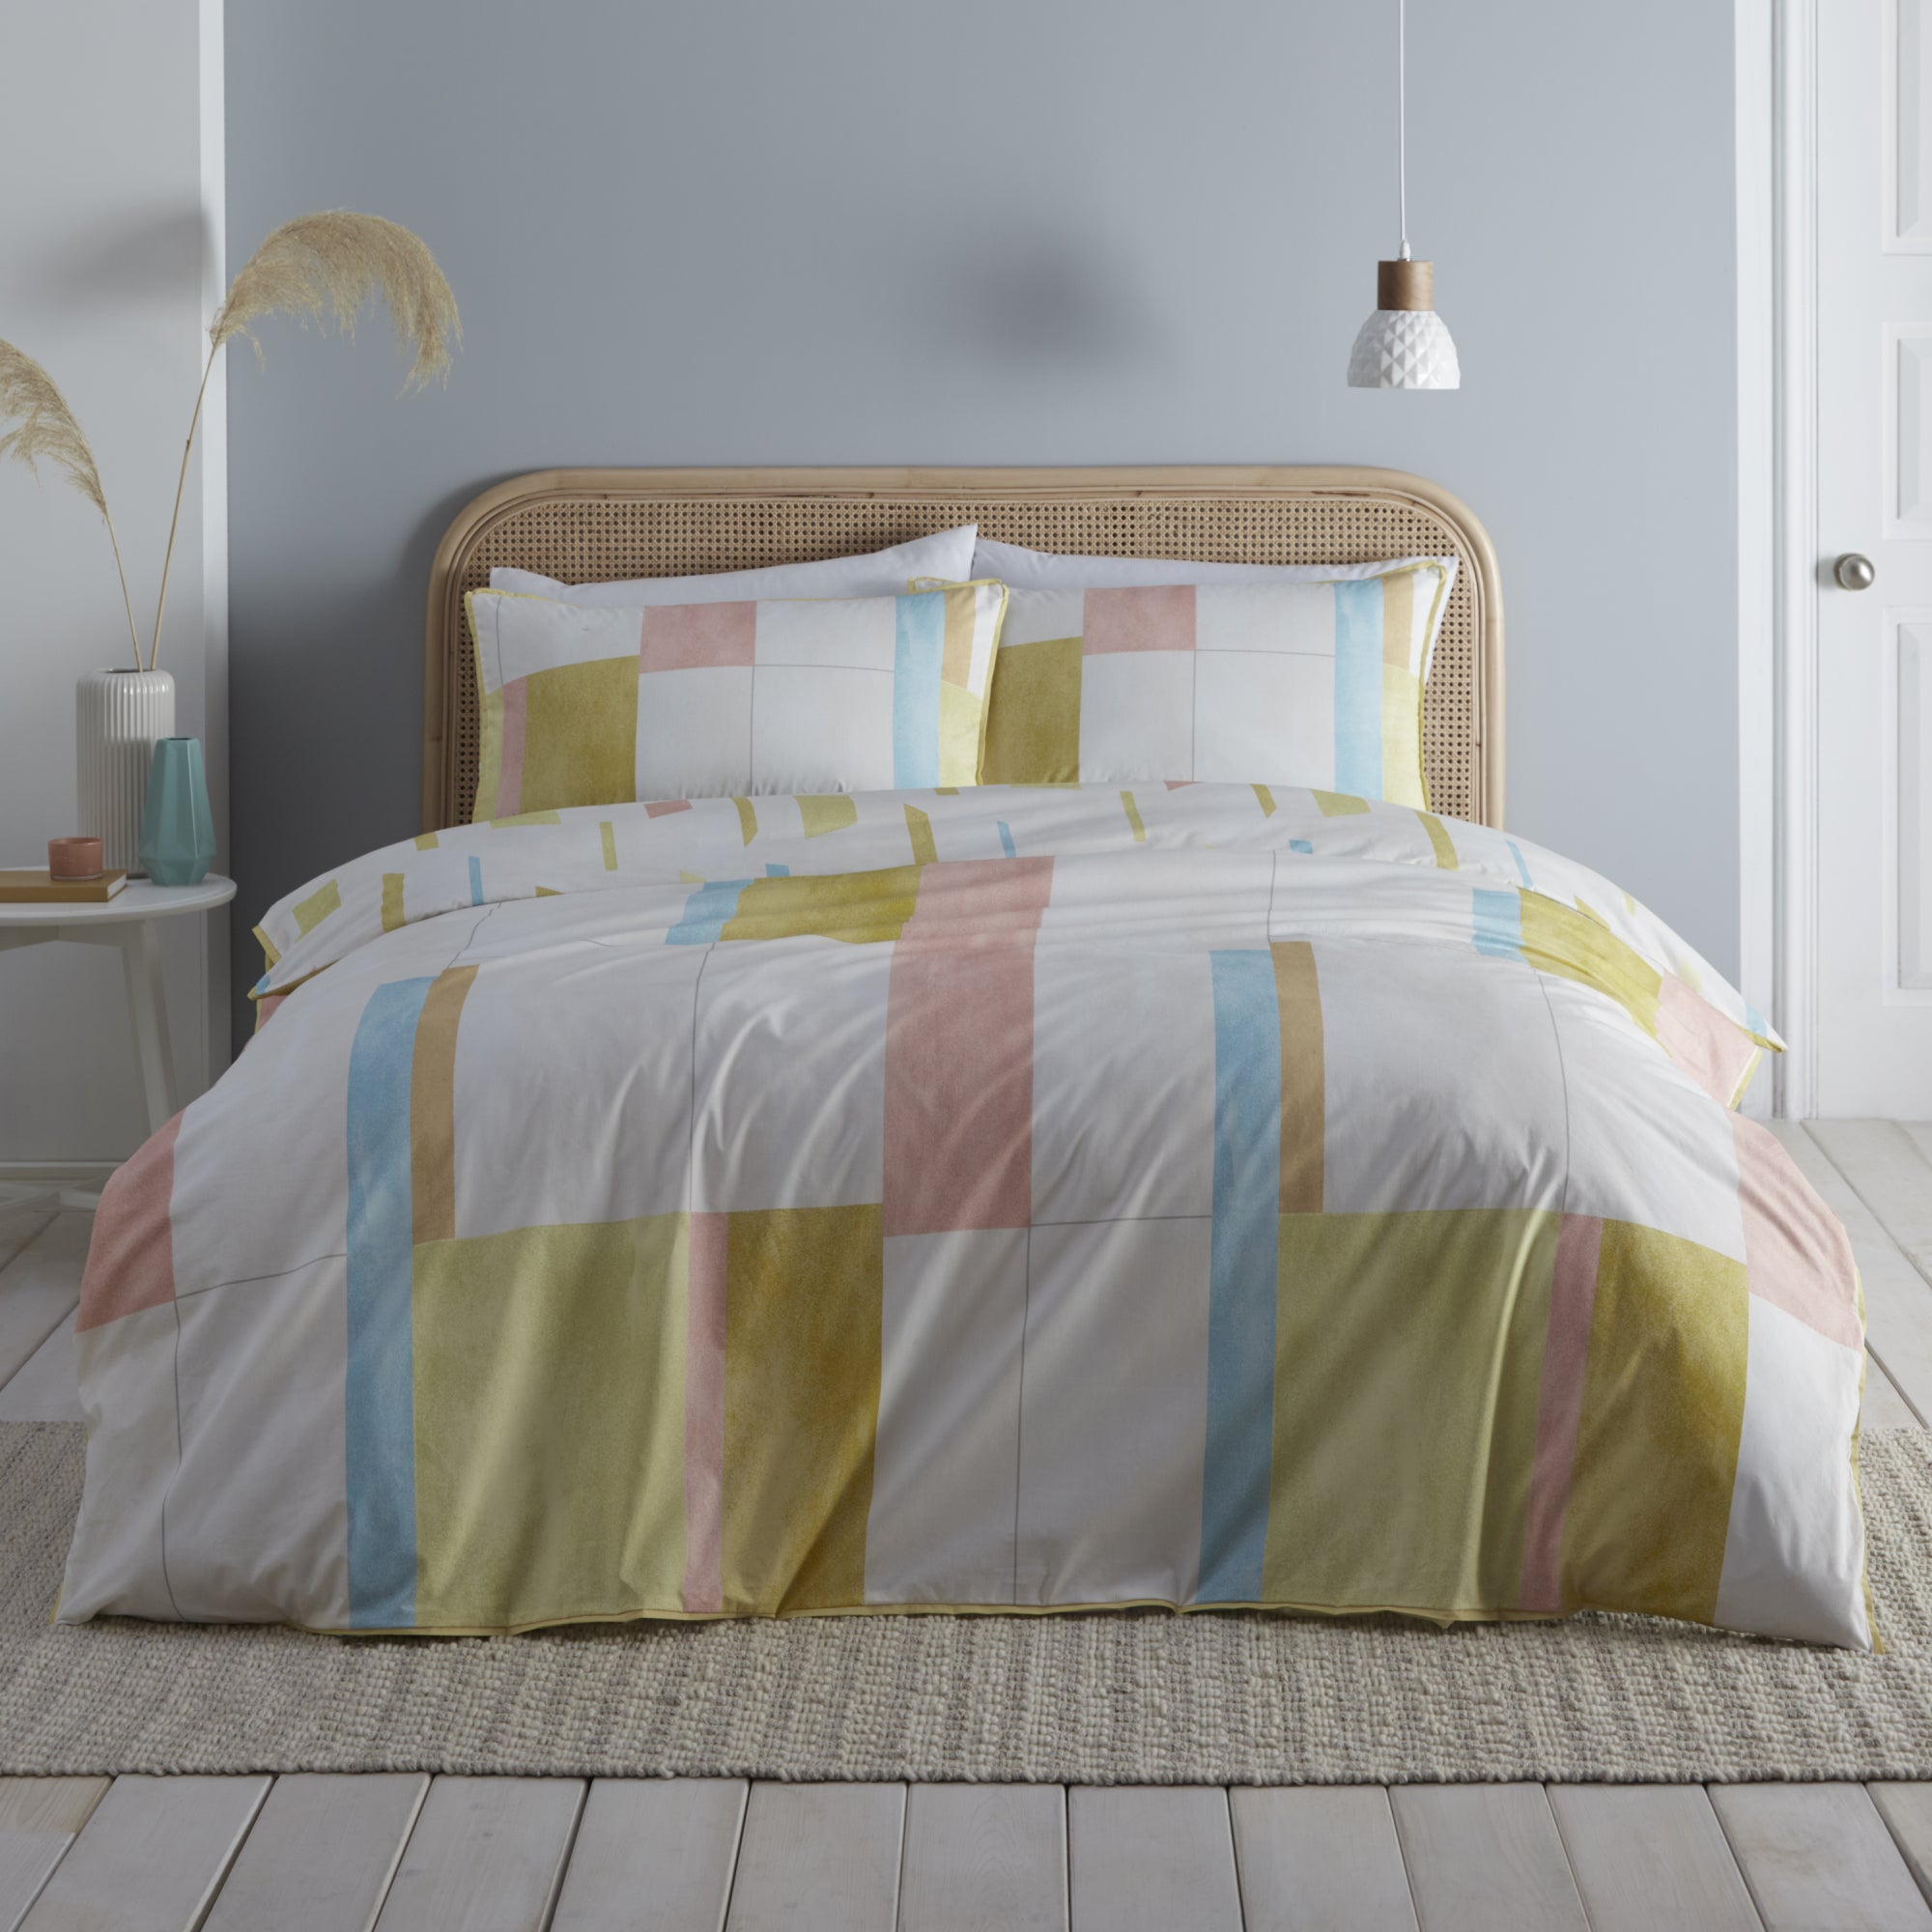 Duvet Cover Set Mariko by Appletree Style in Yellow